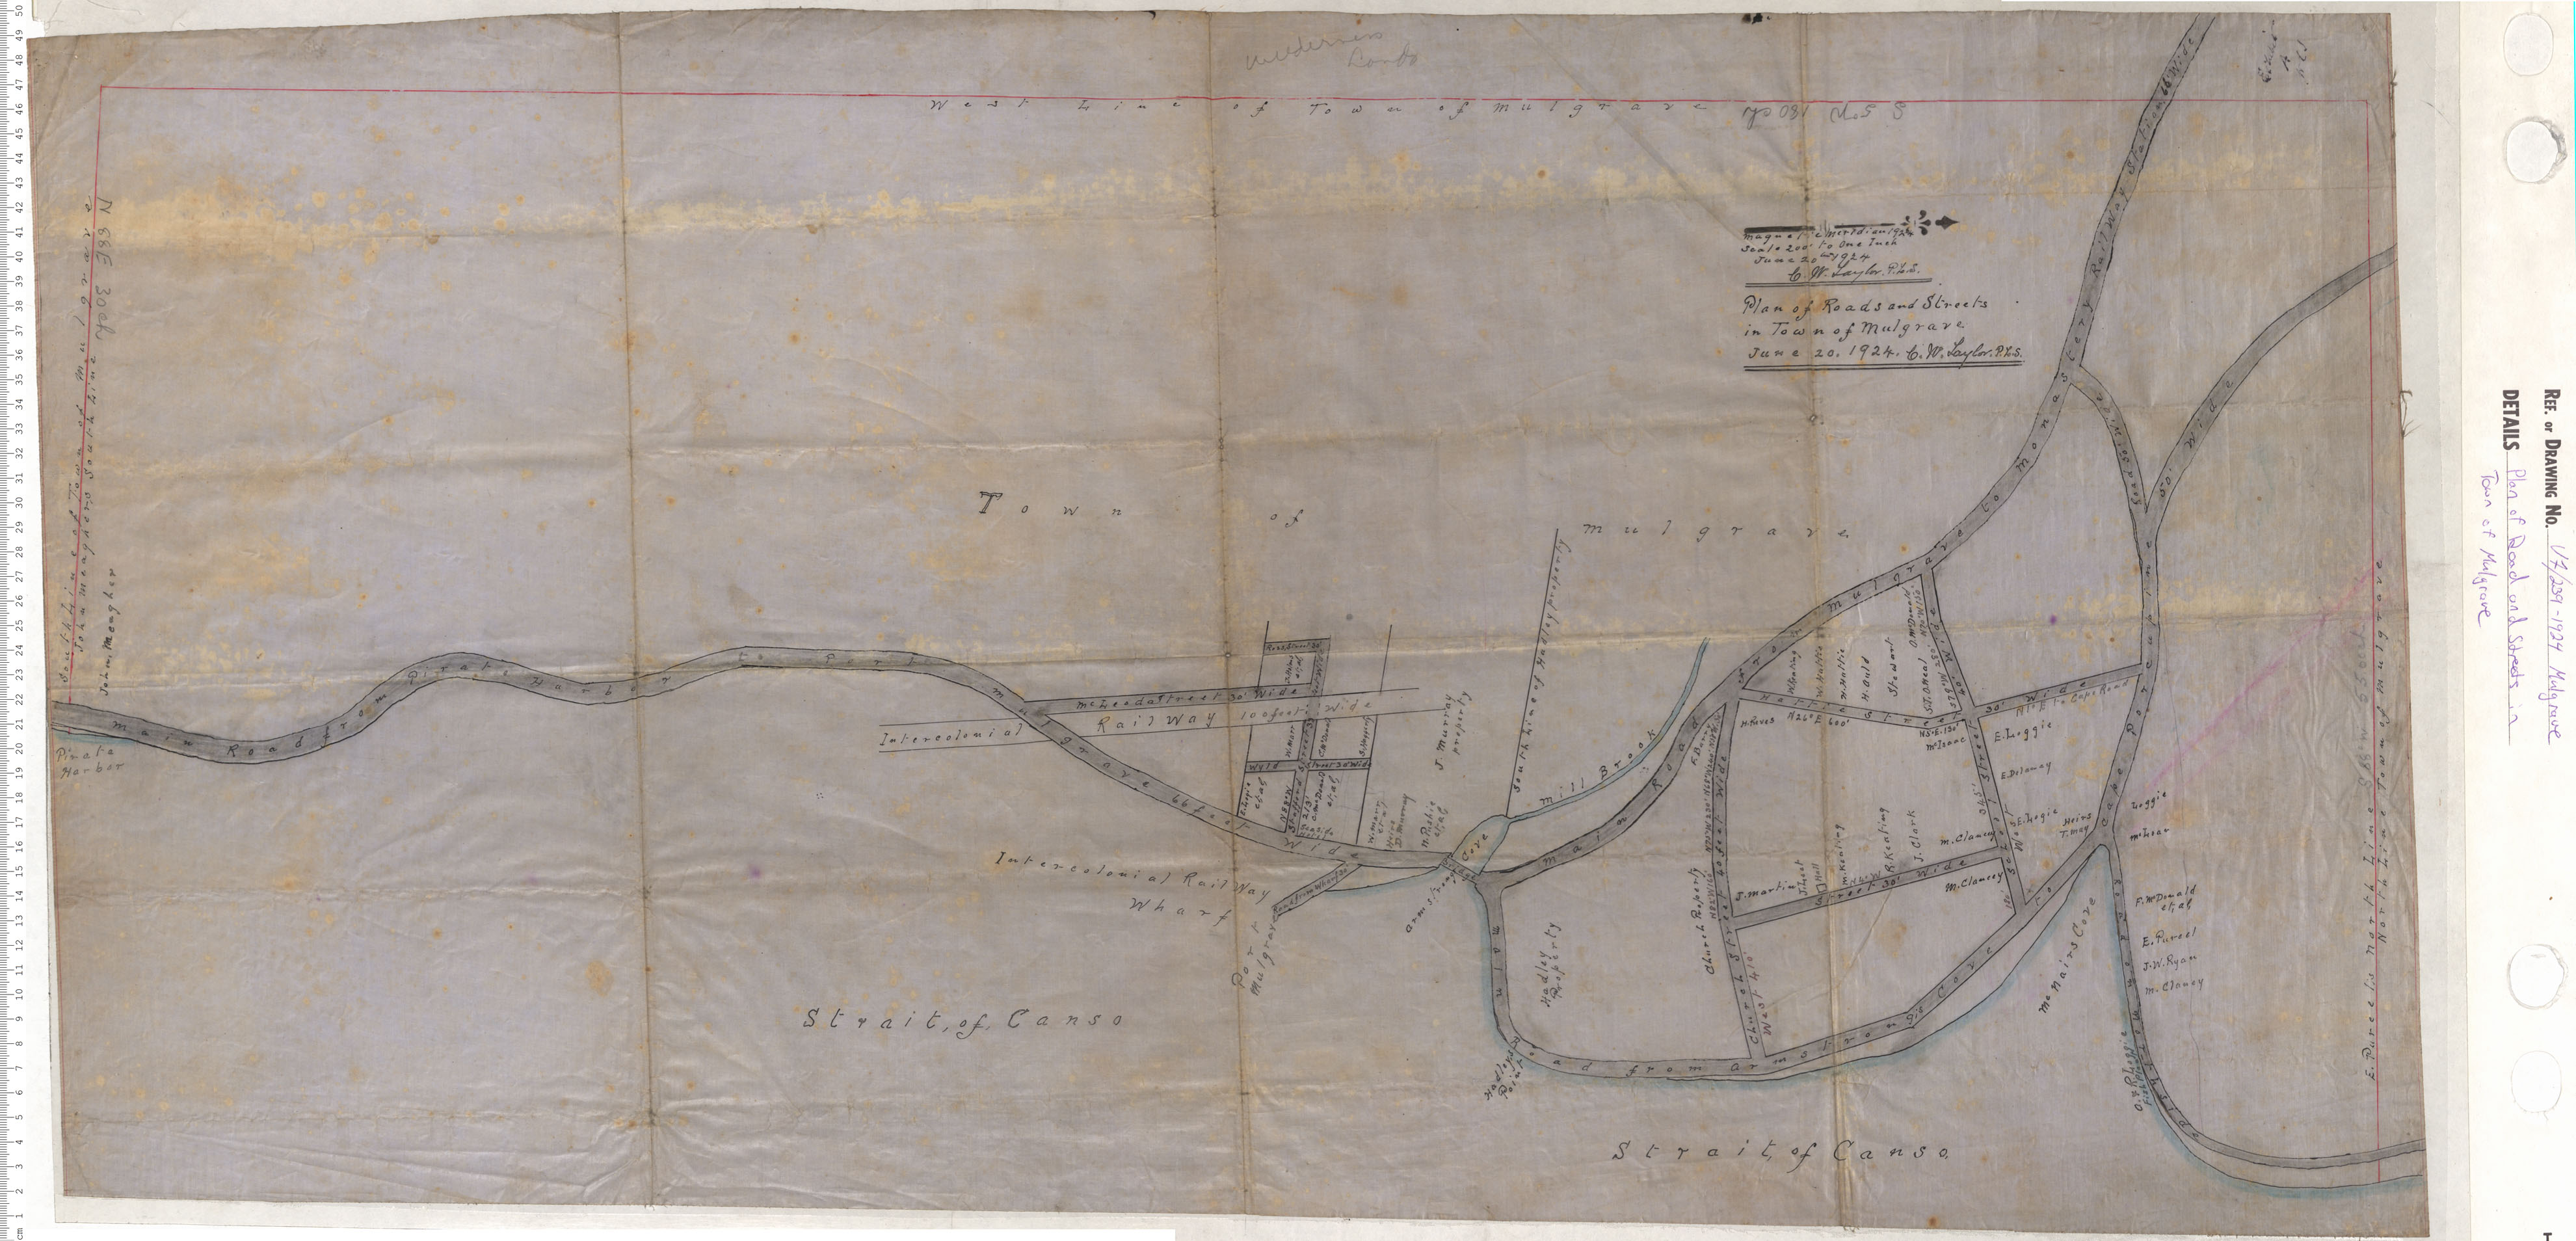 Plan of Road and Streets in Town of Mulgrave